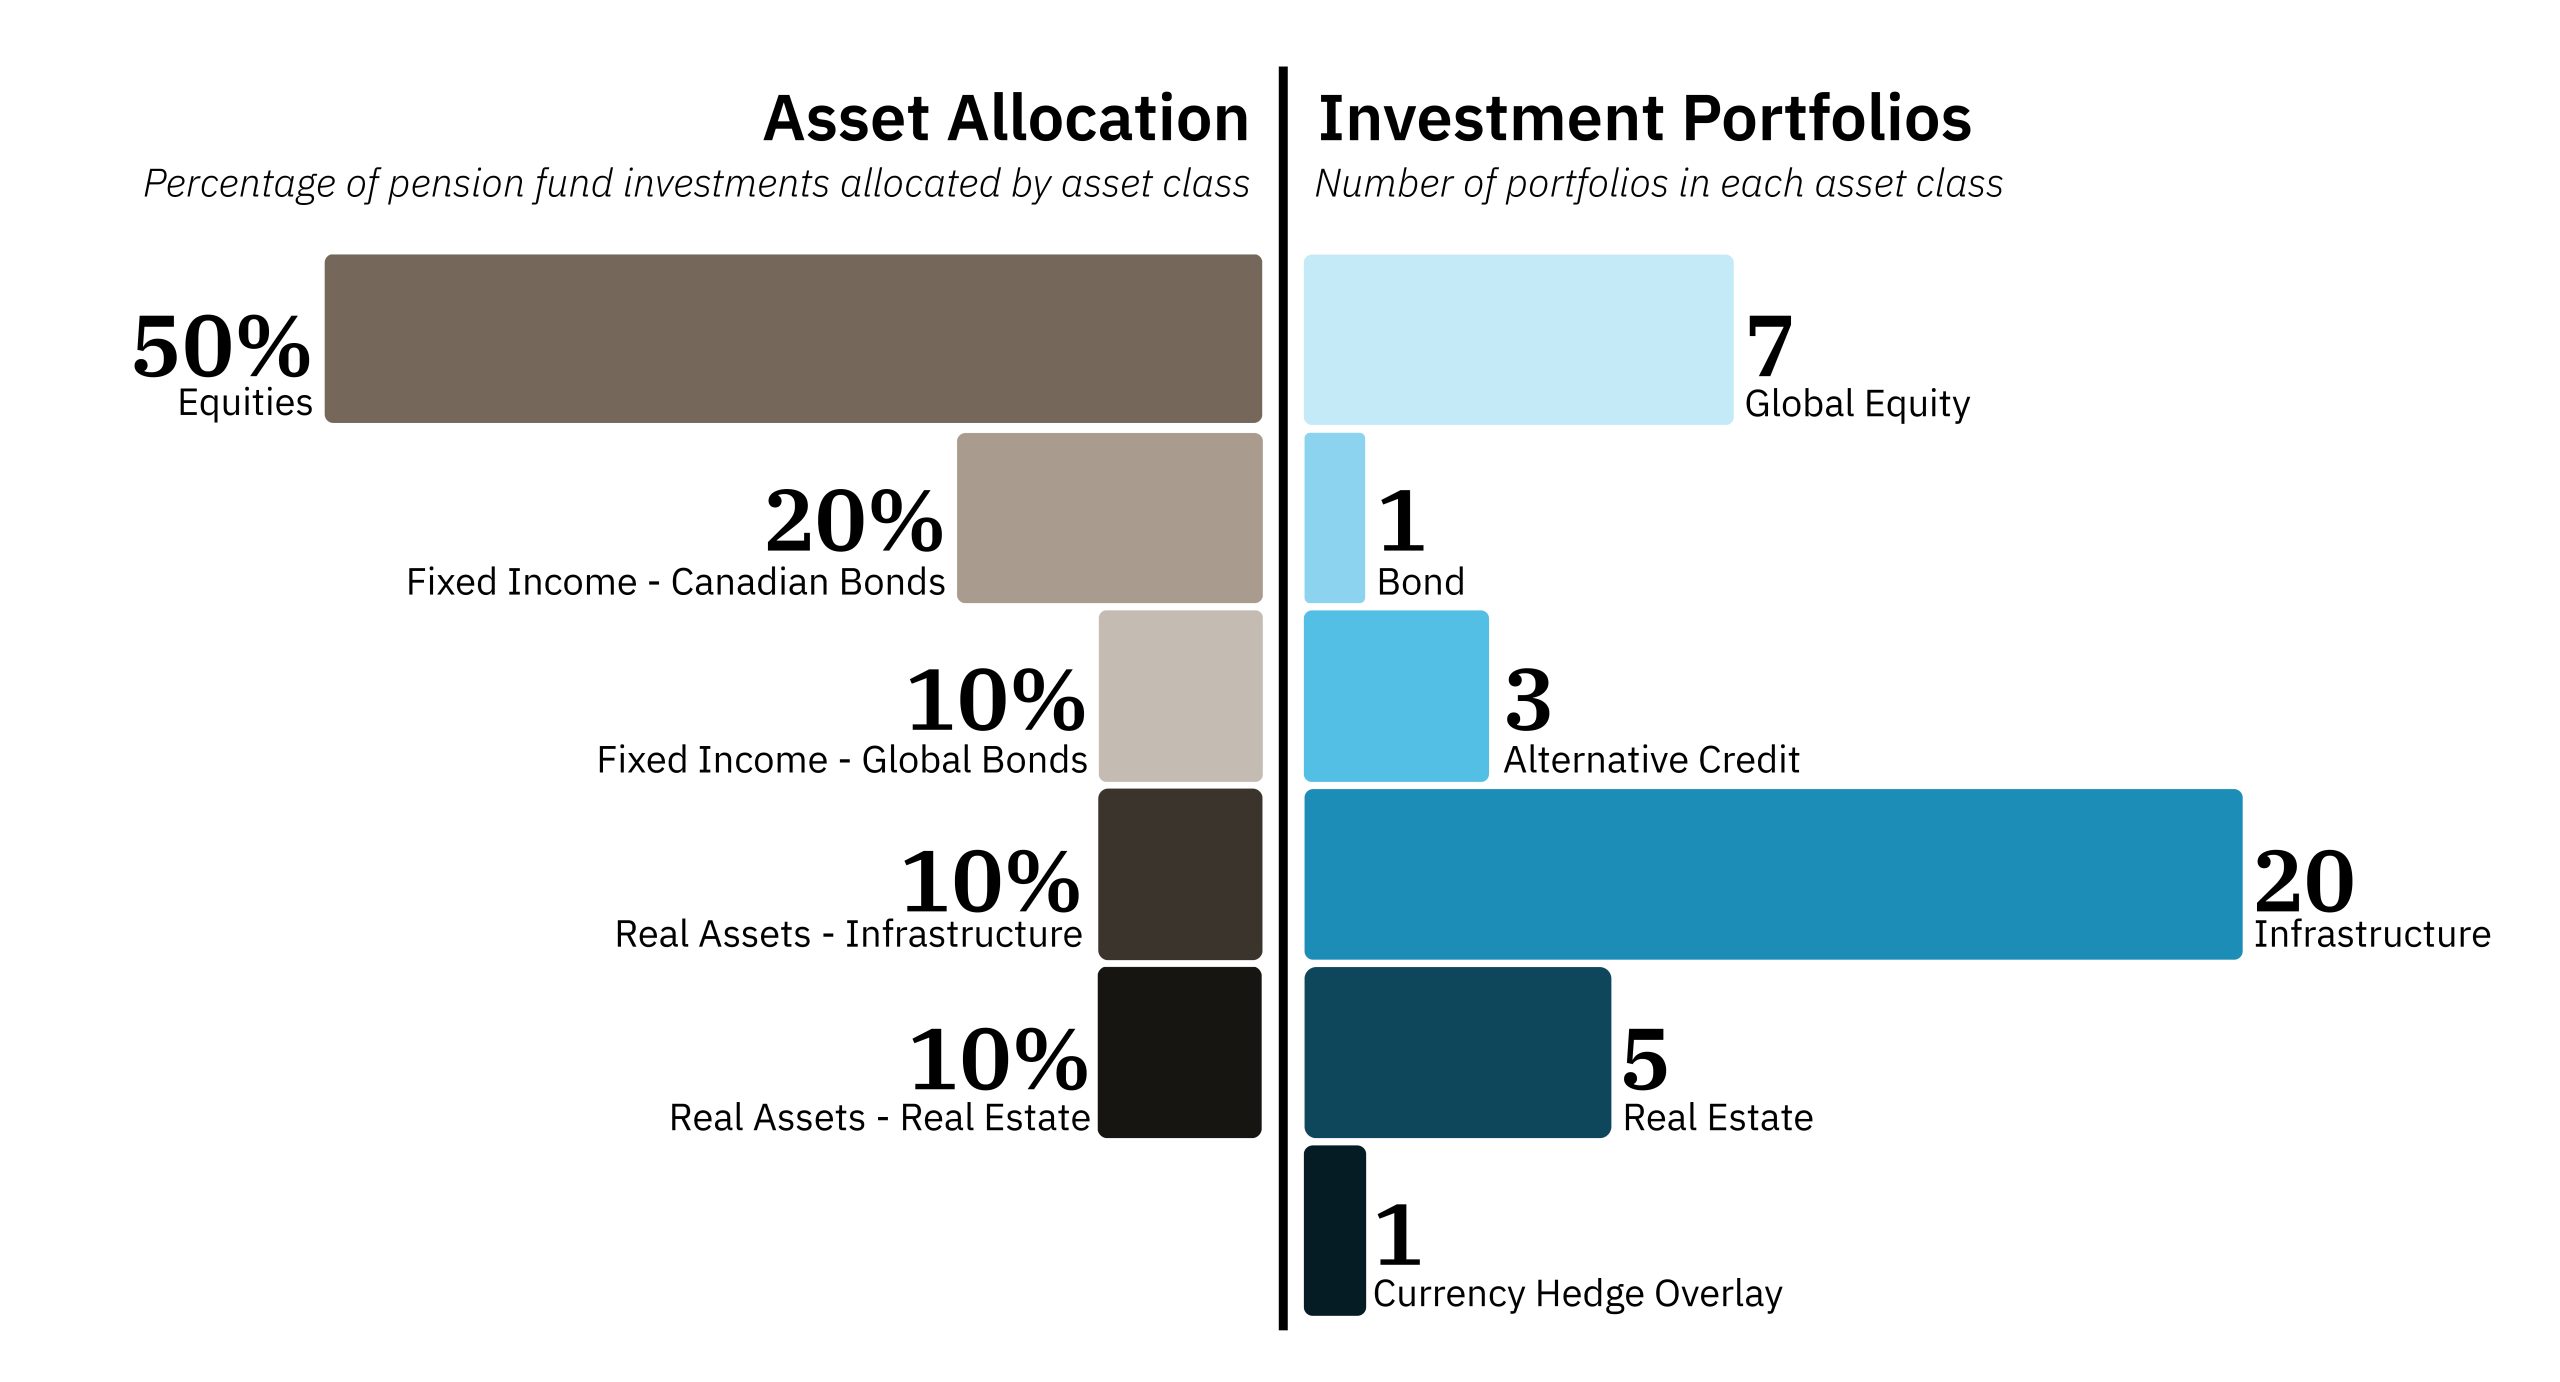 Chart showing Asset Allocation and Investment Portfolios. Part One, Asset Allocation, percentage of pension fund investments allocated by grouping. 50% equities. 20% Fixed income Canadian Bonds. 10% Fixed income - Global Bonds. 10% Real Assets - Infrastructure. 10% Real Assets - Real Estate. Part Two, Investment Portfolios, number of different portfolios pension funds are invested in. 7 Global Equity portfolios. 1 Bond portfolio. 3 Alternative Credit portfolio. 20 Infrastructure portfolios. 5 Real Estate portfolios. 1 Currency Hedge Overlay portfolio. 